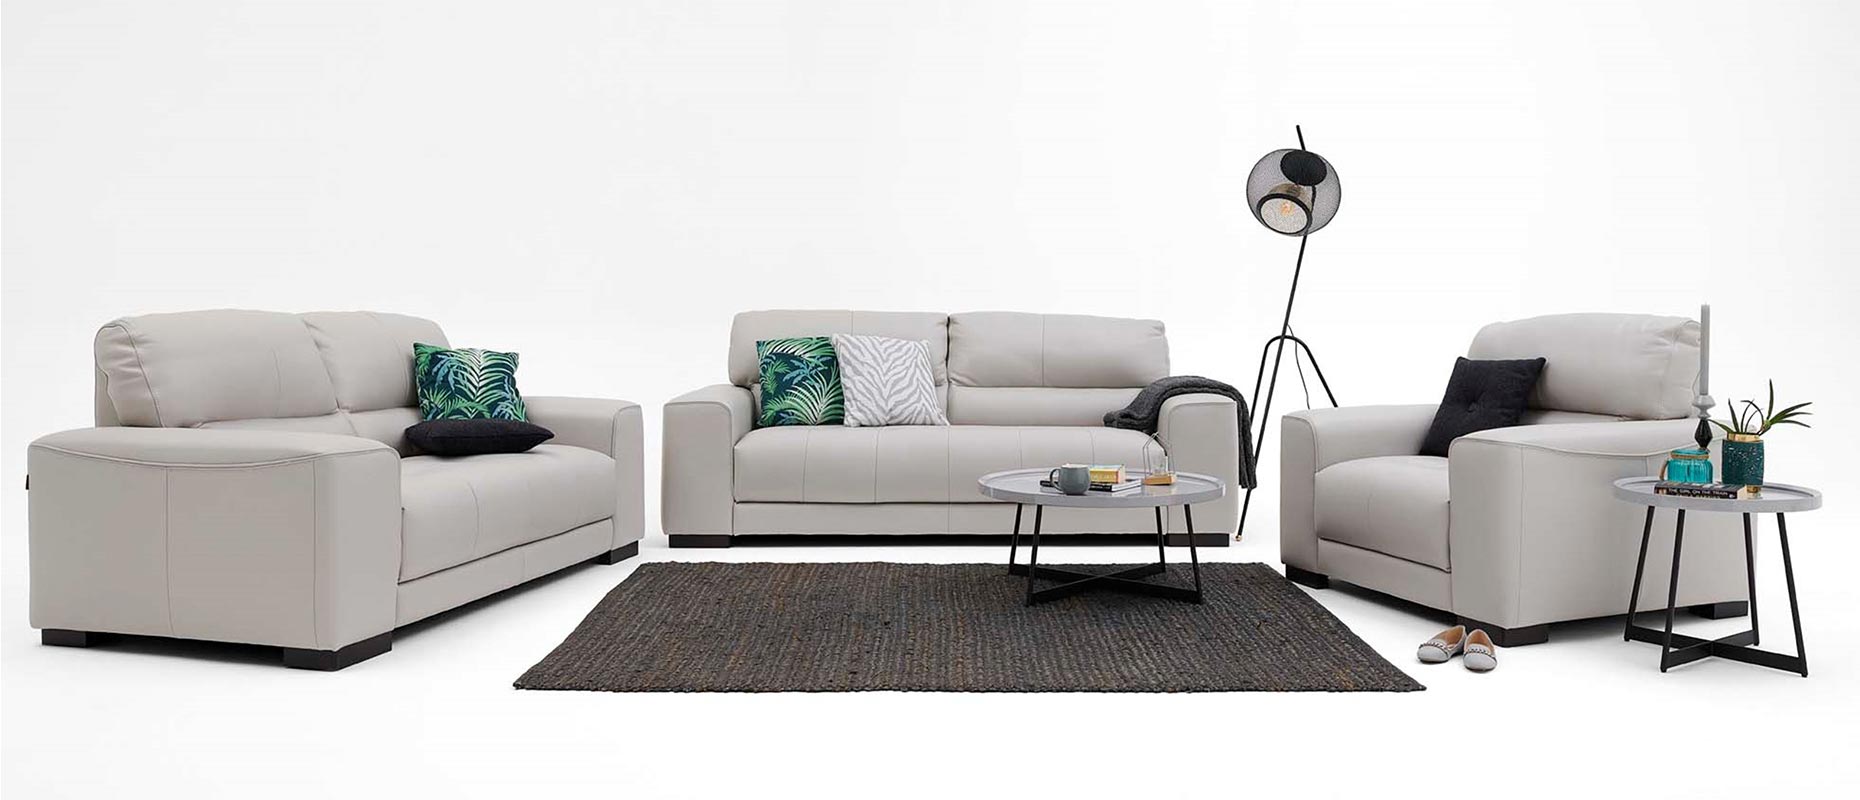 Marcos leather sofa collection at Forrest Furnishing